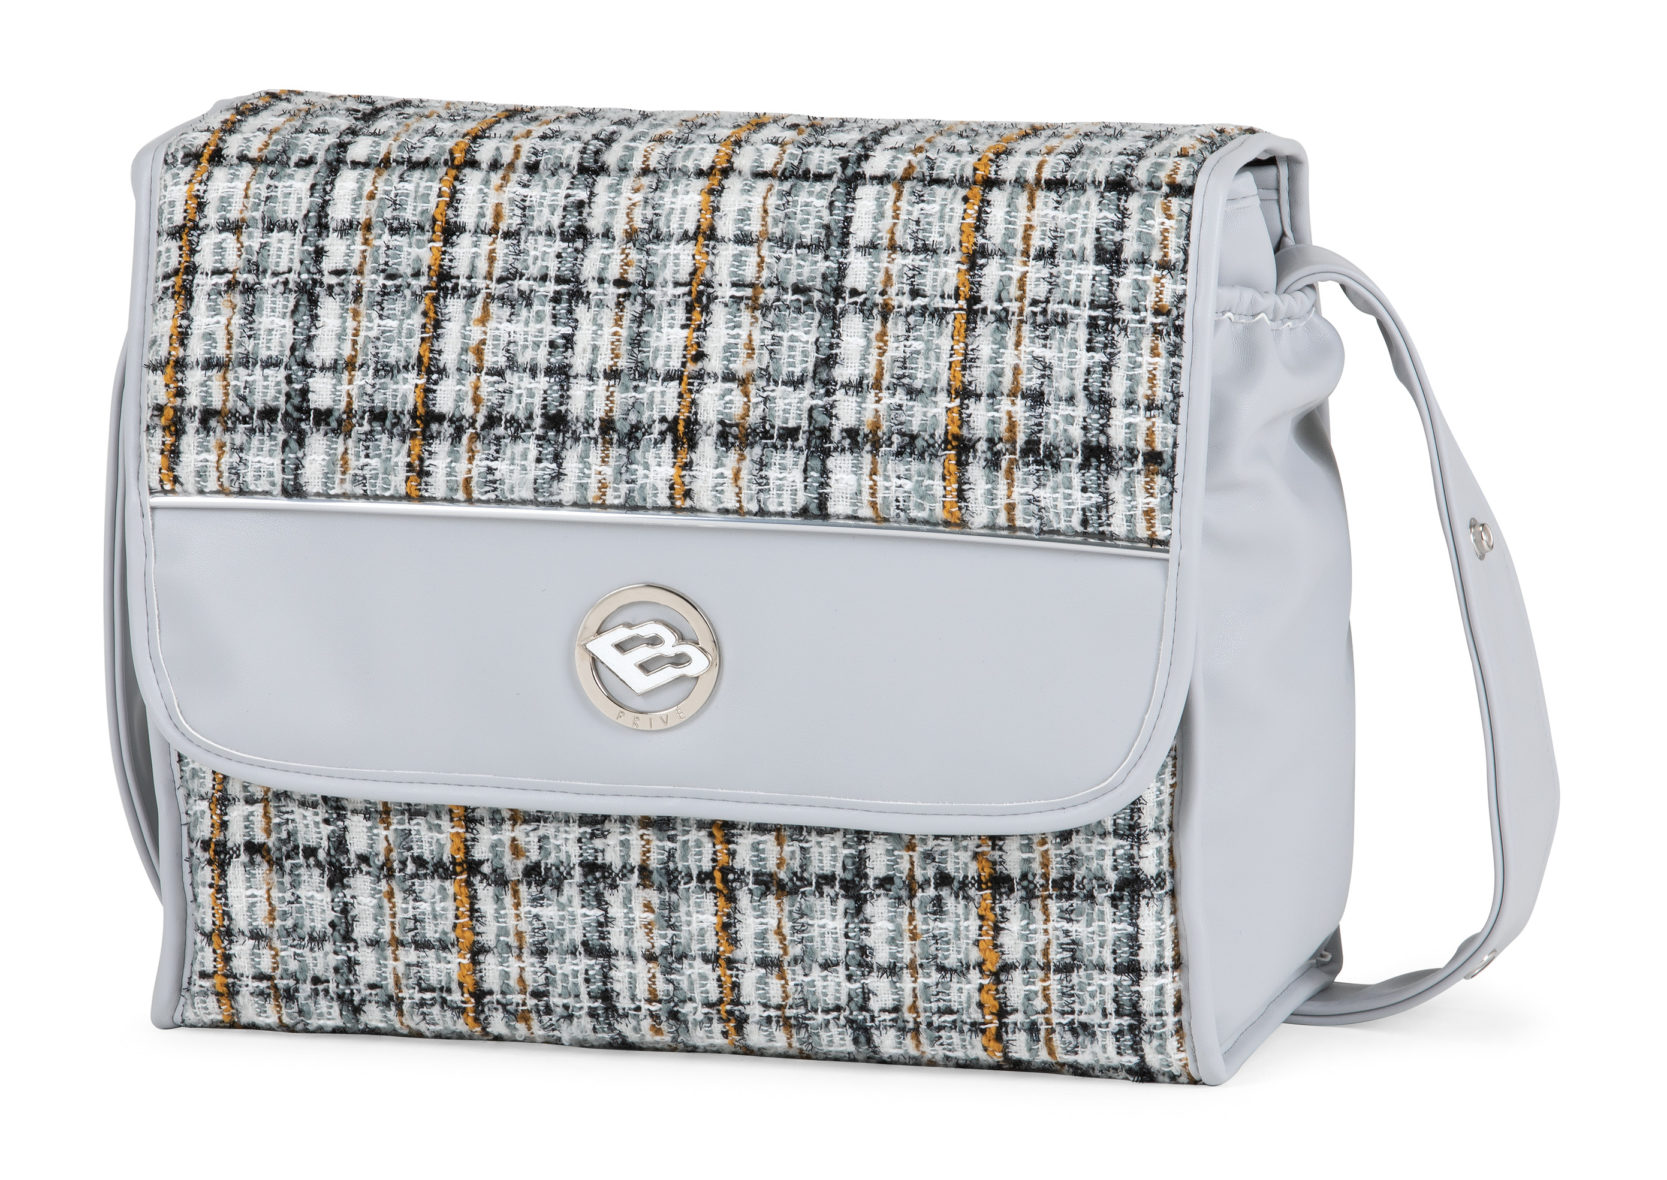 Bebecar Prive Carre Square Changing Bag- Woven Grey